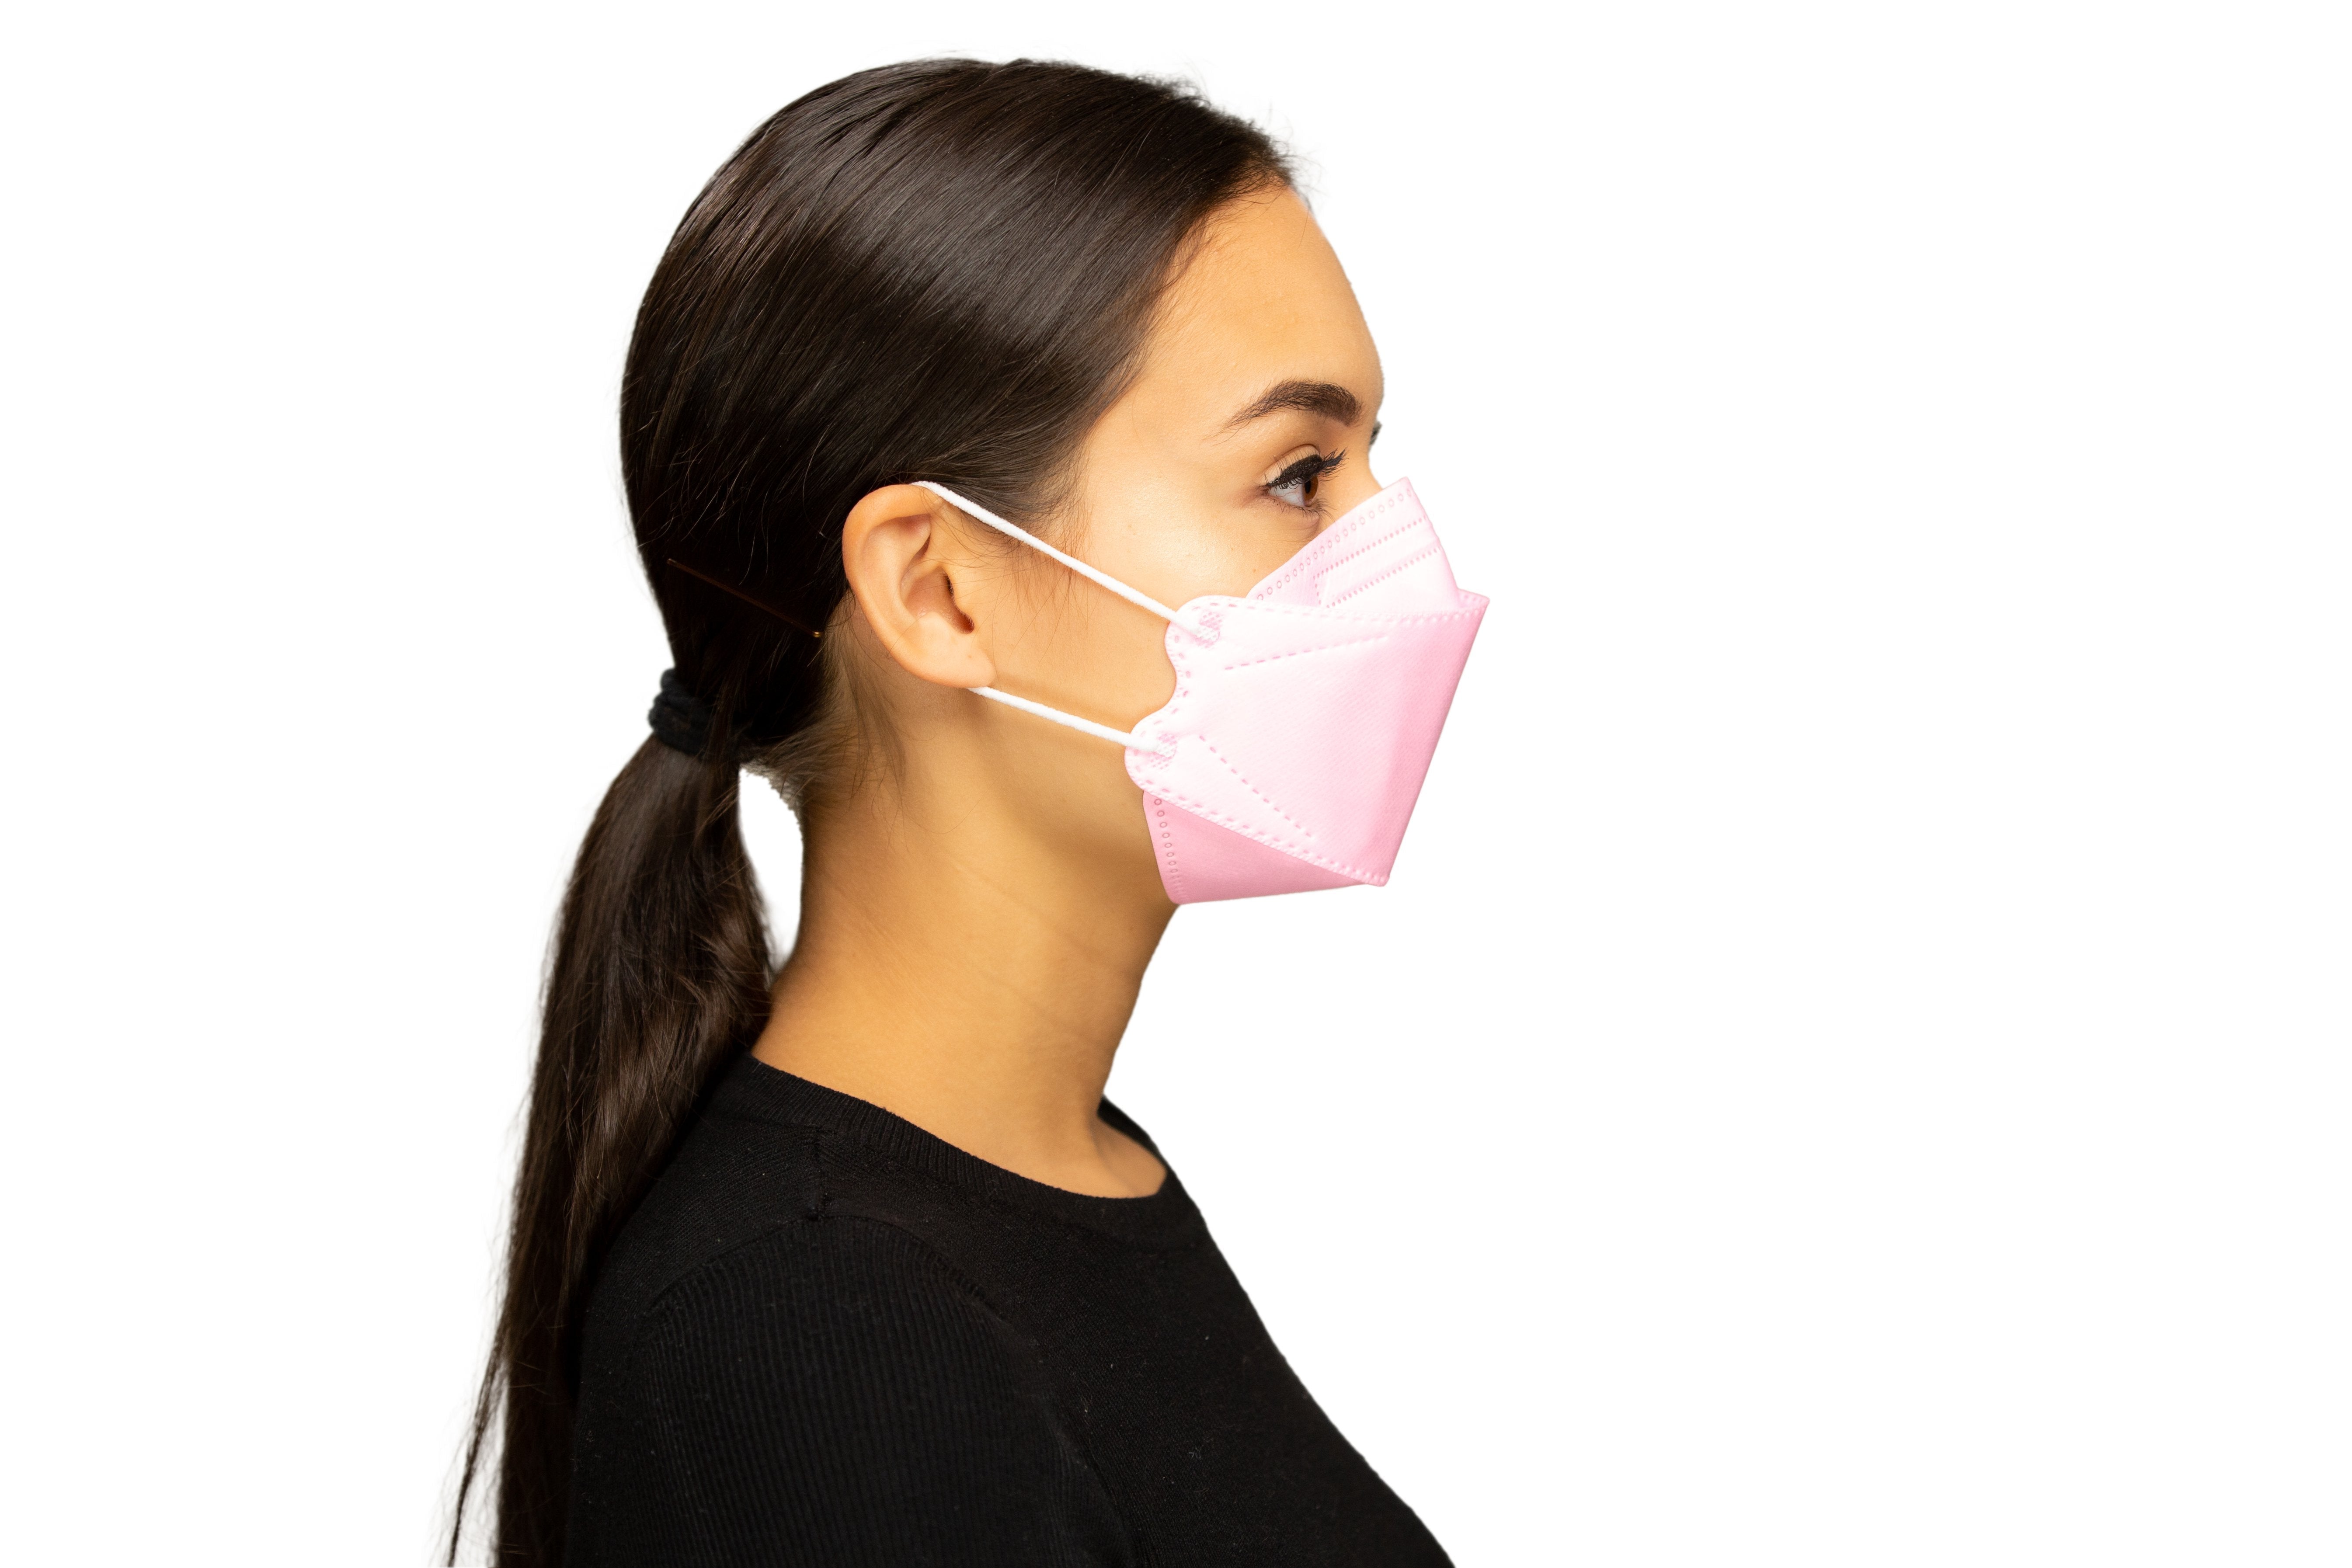 Good Manner KF94 Mask Pink Adult (10 Masks) / Free Shipping within Canada / The Authorized Distributor in Canada. | Clear Pro Global_Good Manner